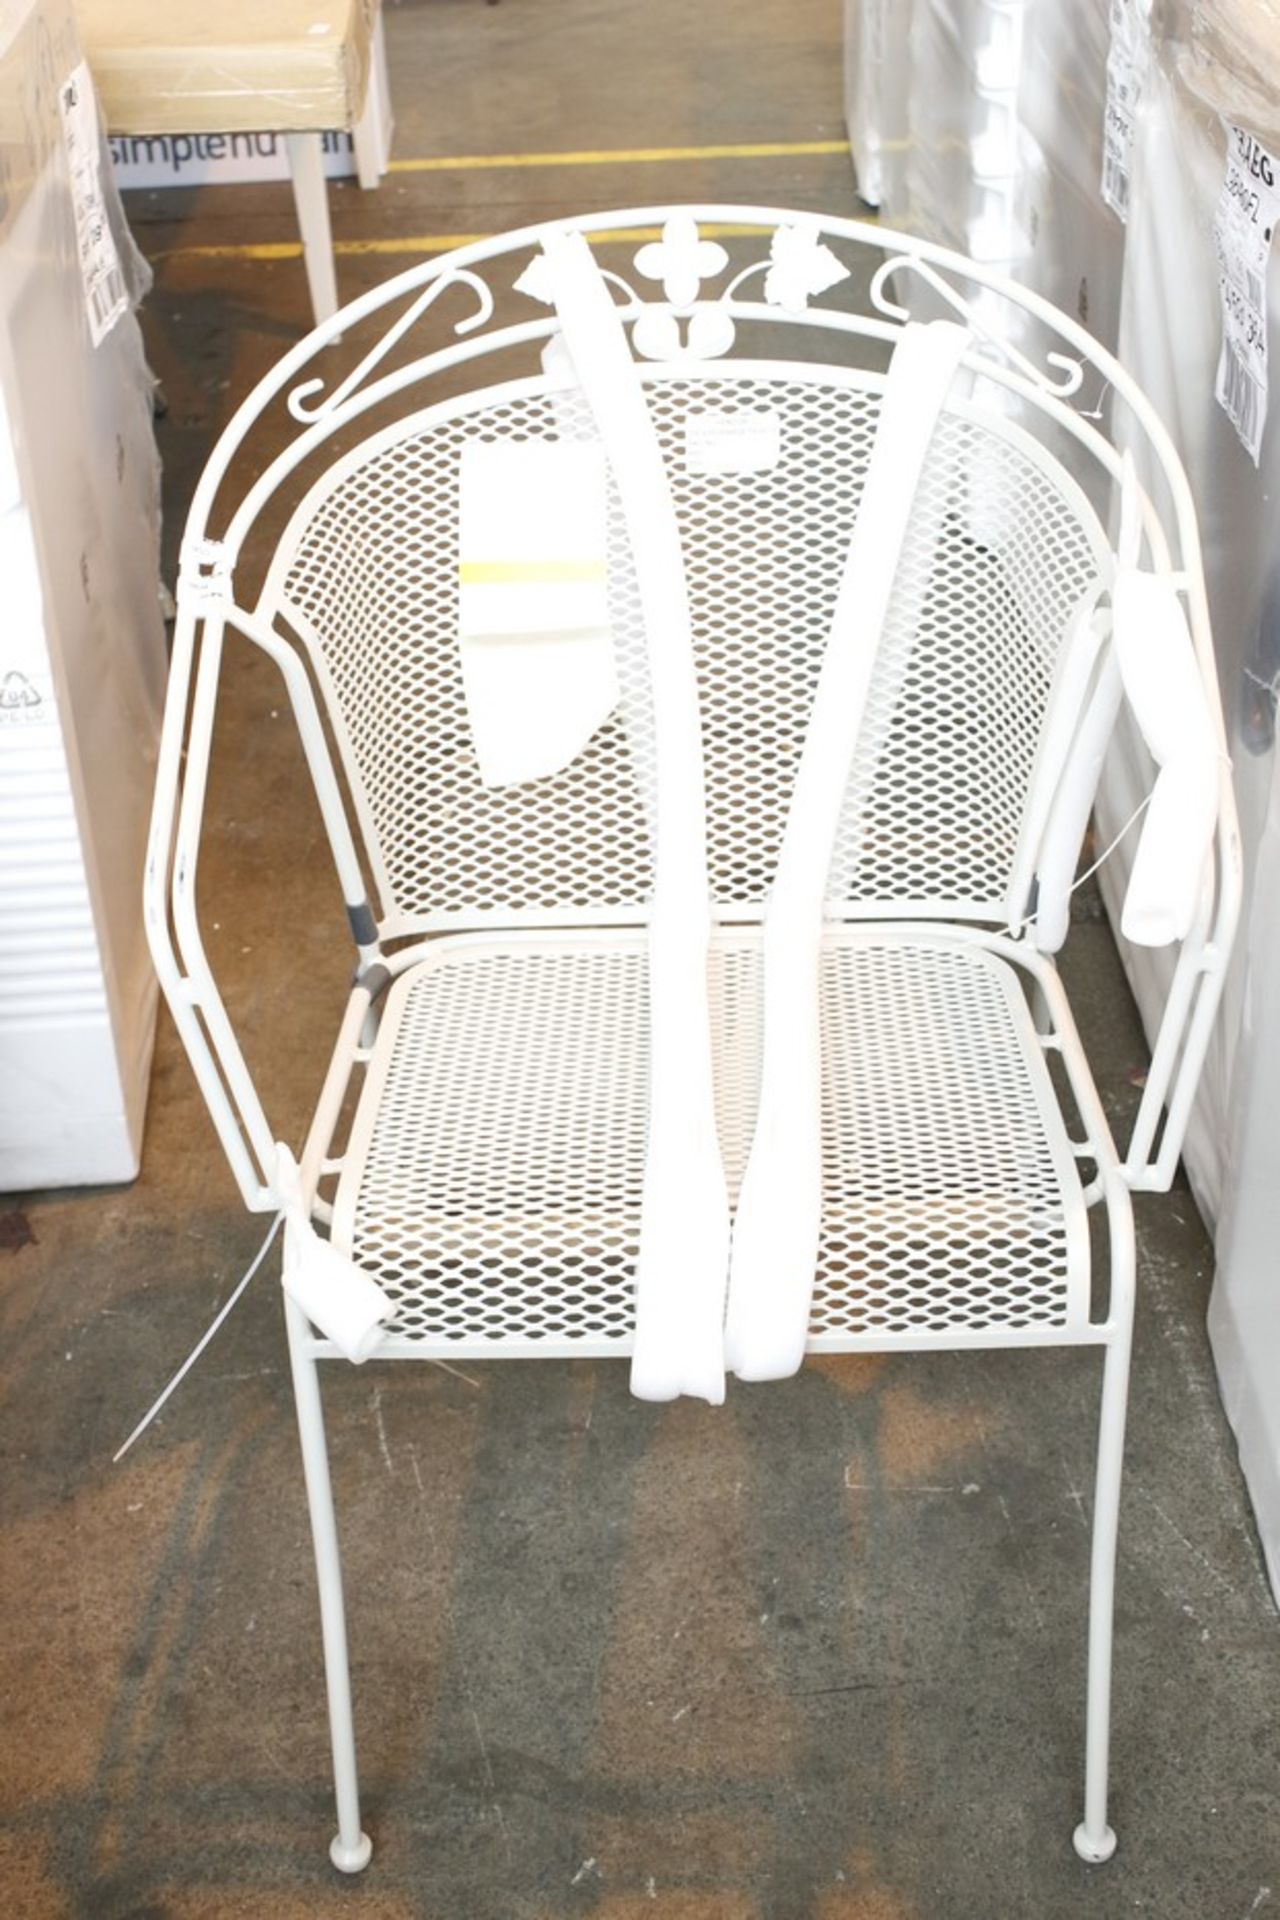 1 x KETTLER HENLEY ROUND BACK CHAIRS RRP £125 (82003804)(18.6.15)  *PLEASE NOTE THAT THE BID PRICE